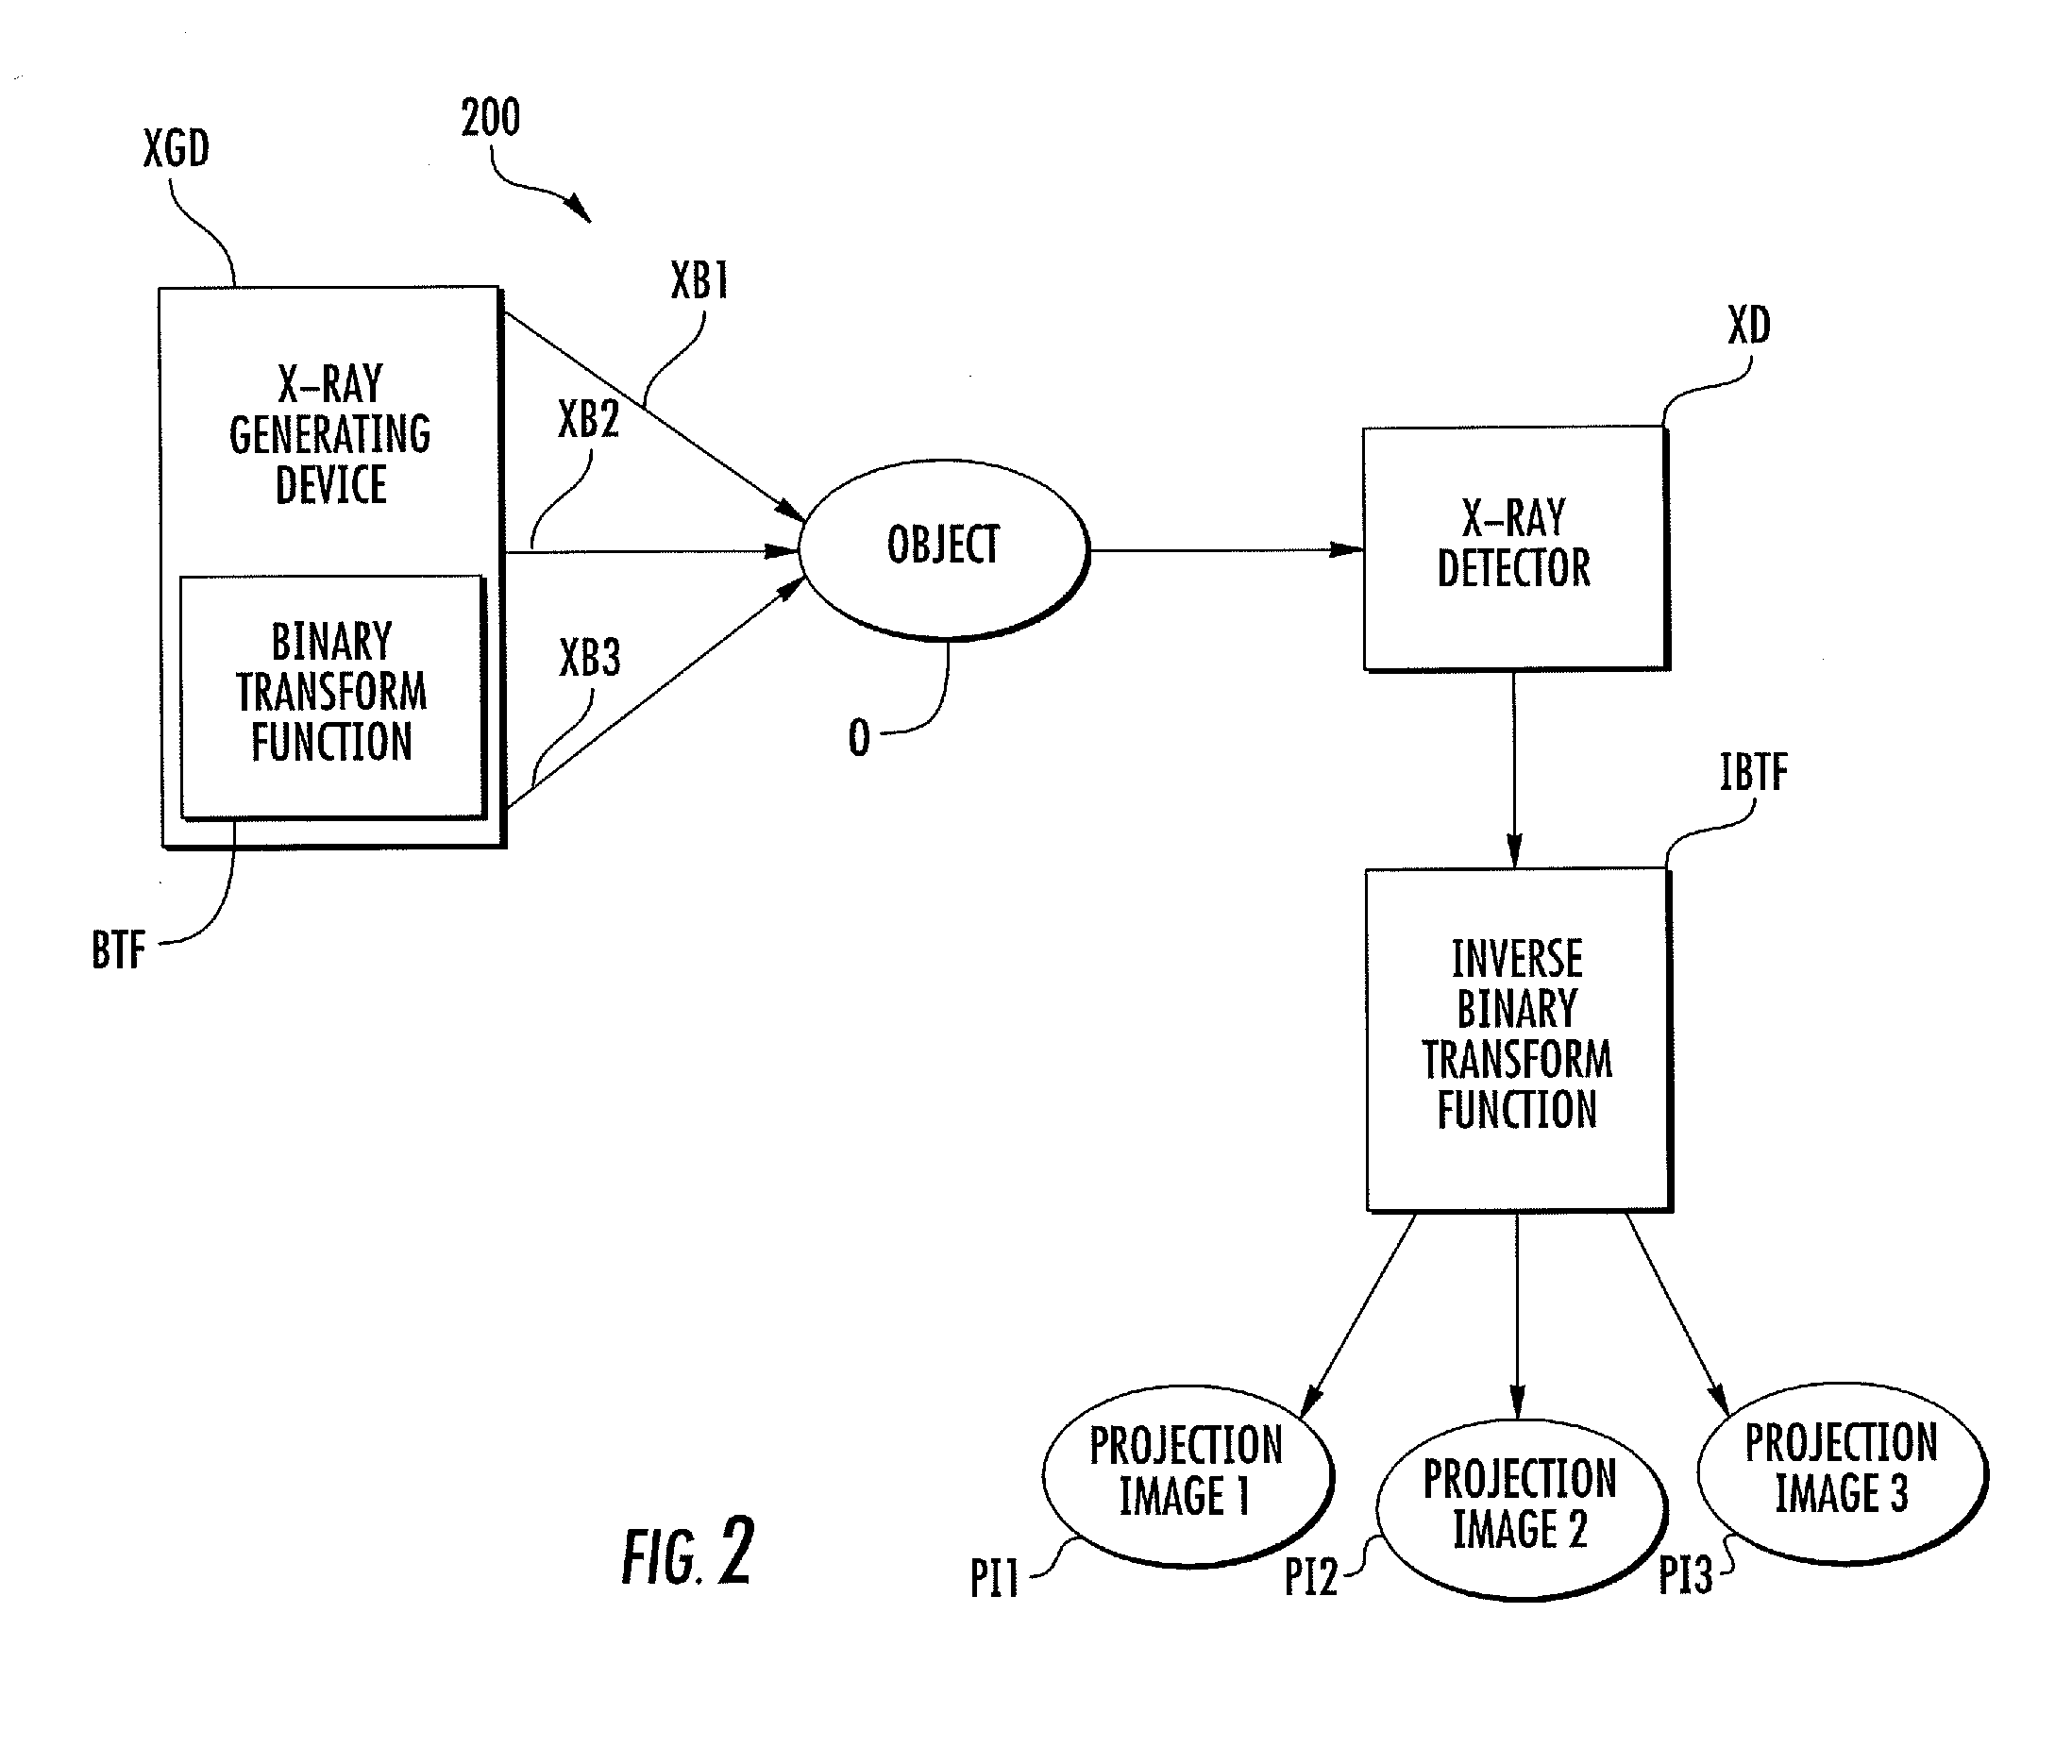 Stationary gantry computed tomography systems and methods with distributed x-ray source arrays